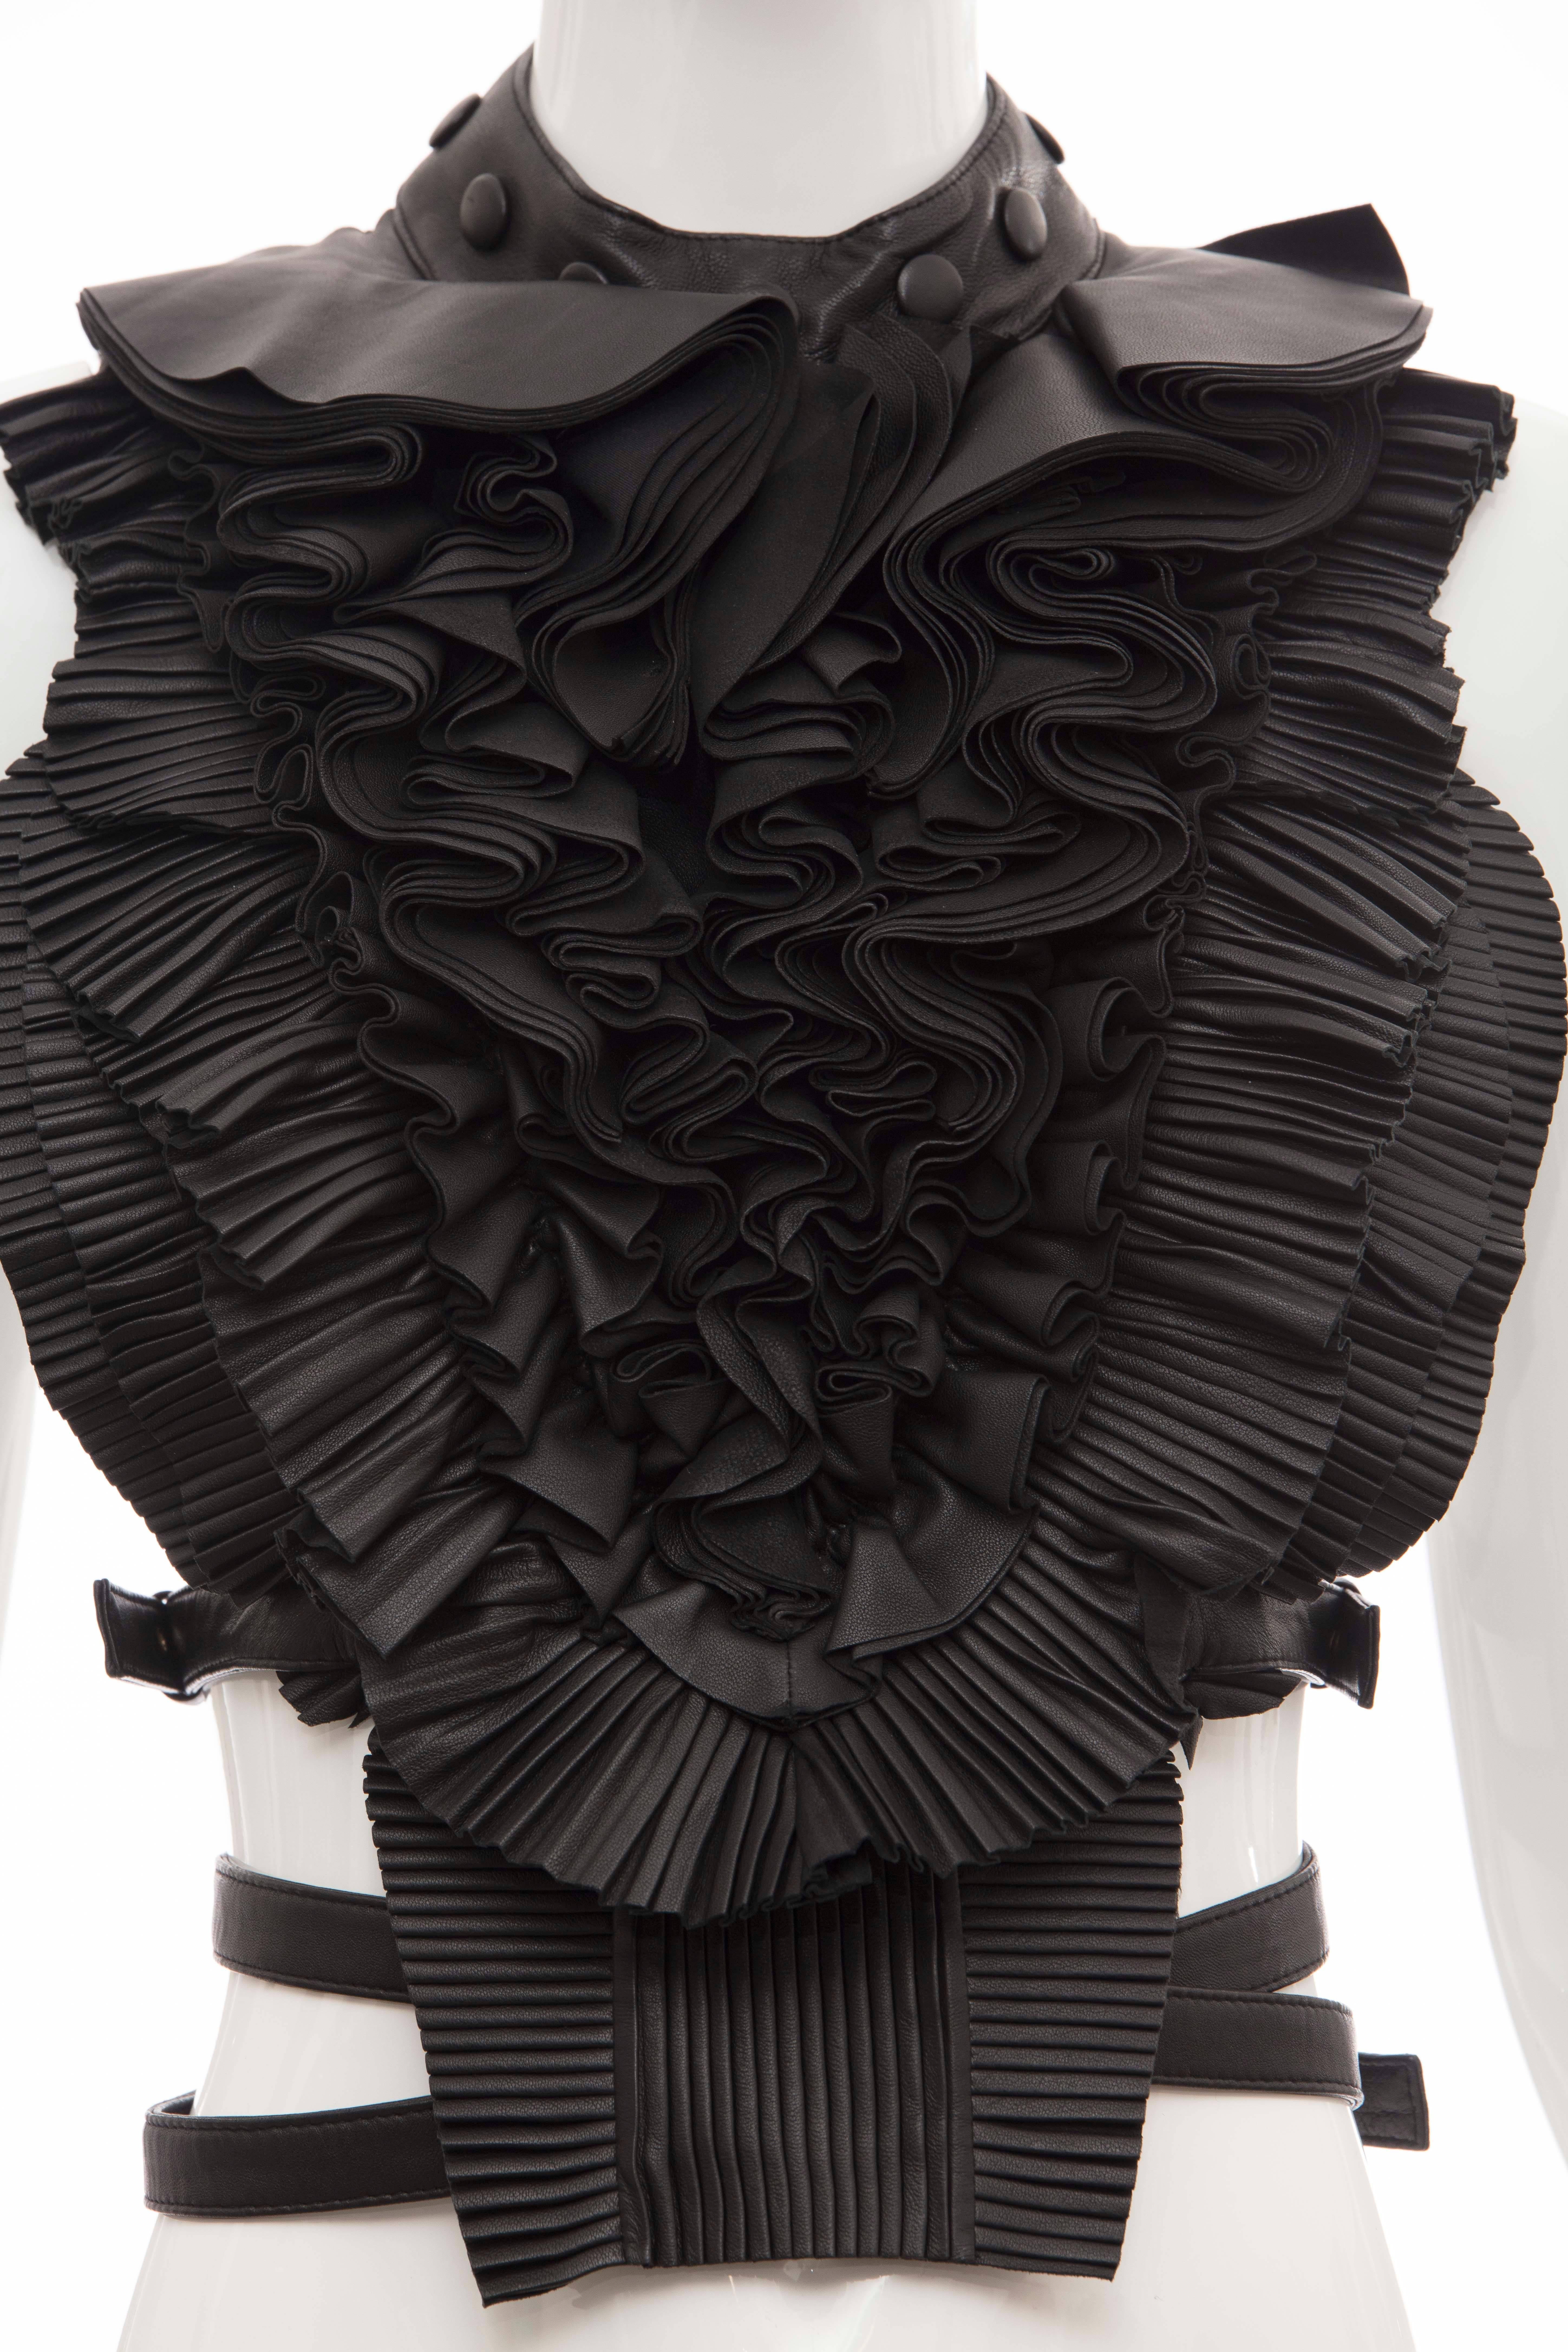 Givenchy by Riccardo Tisci Runway Black Leather Ruffled Harness Top, Spring 2011 1